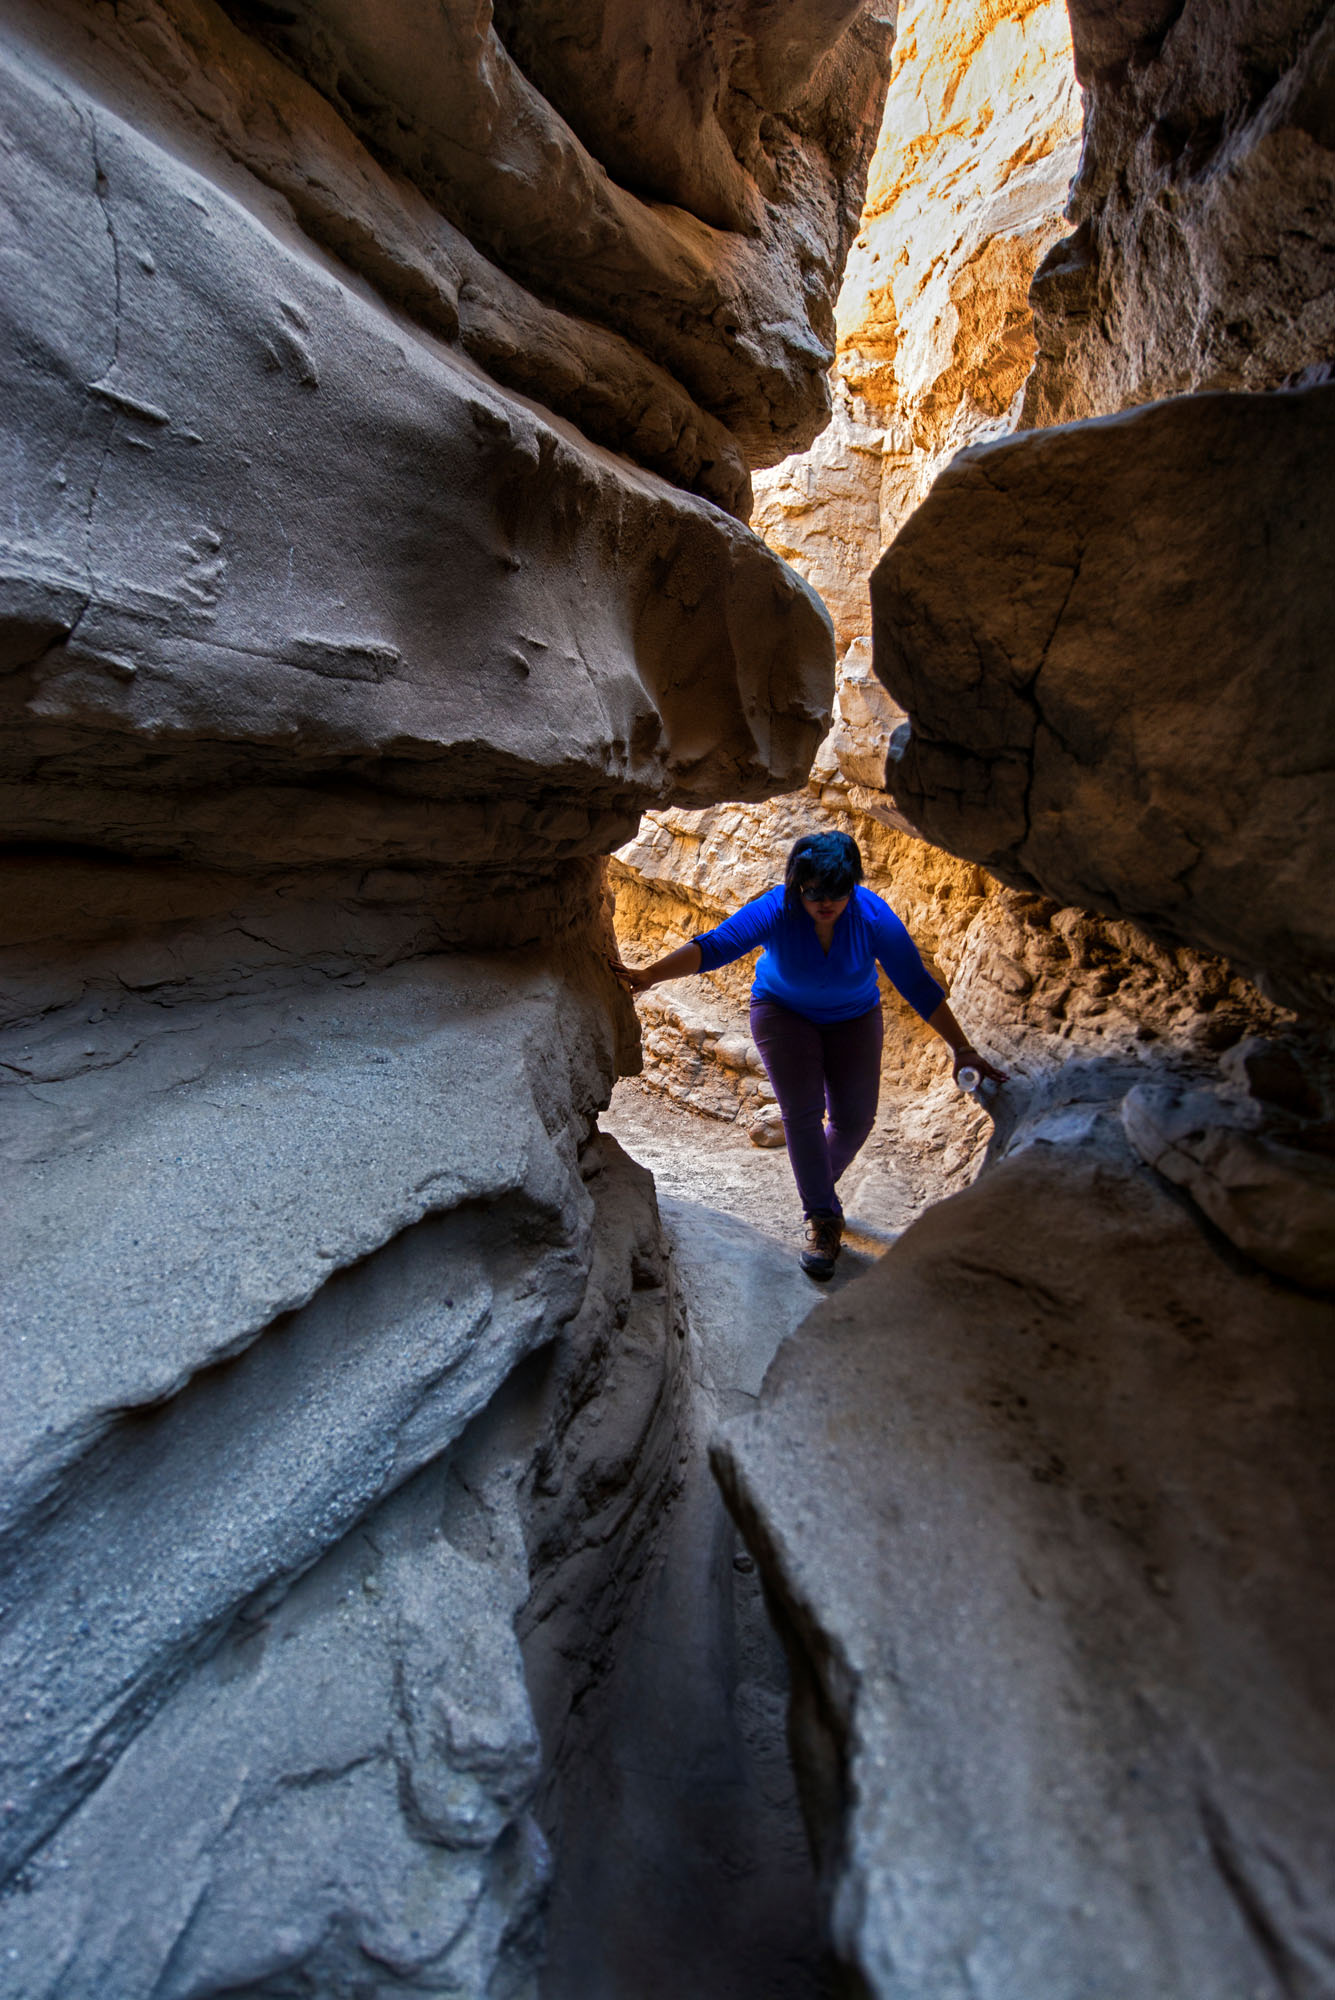 A woman hikes through a rock crevasse, with the sunlight behind her